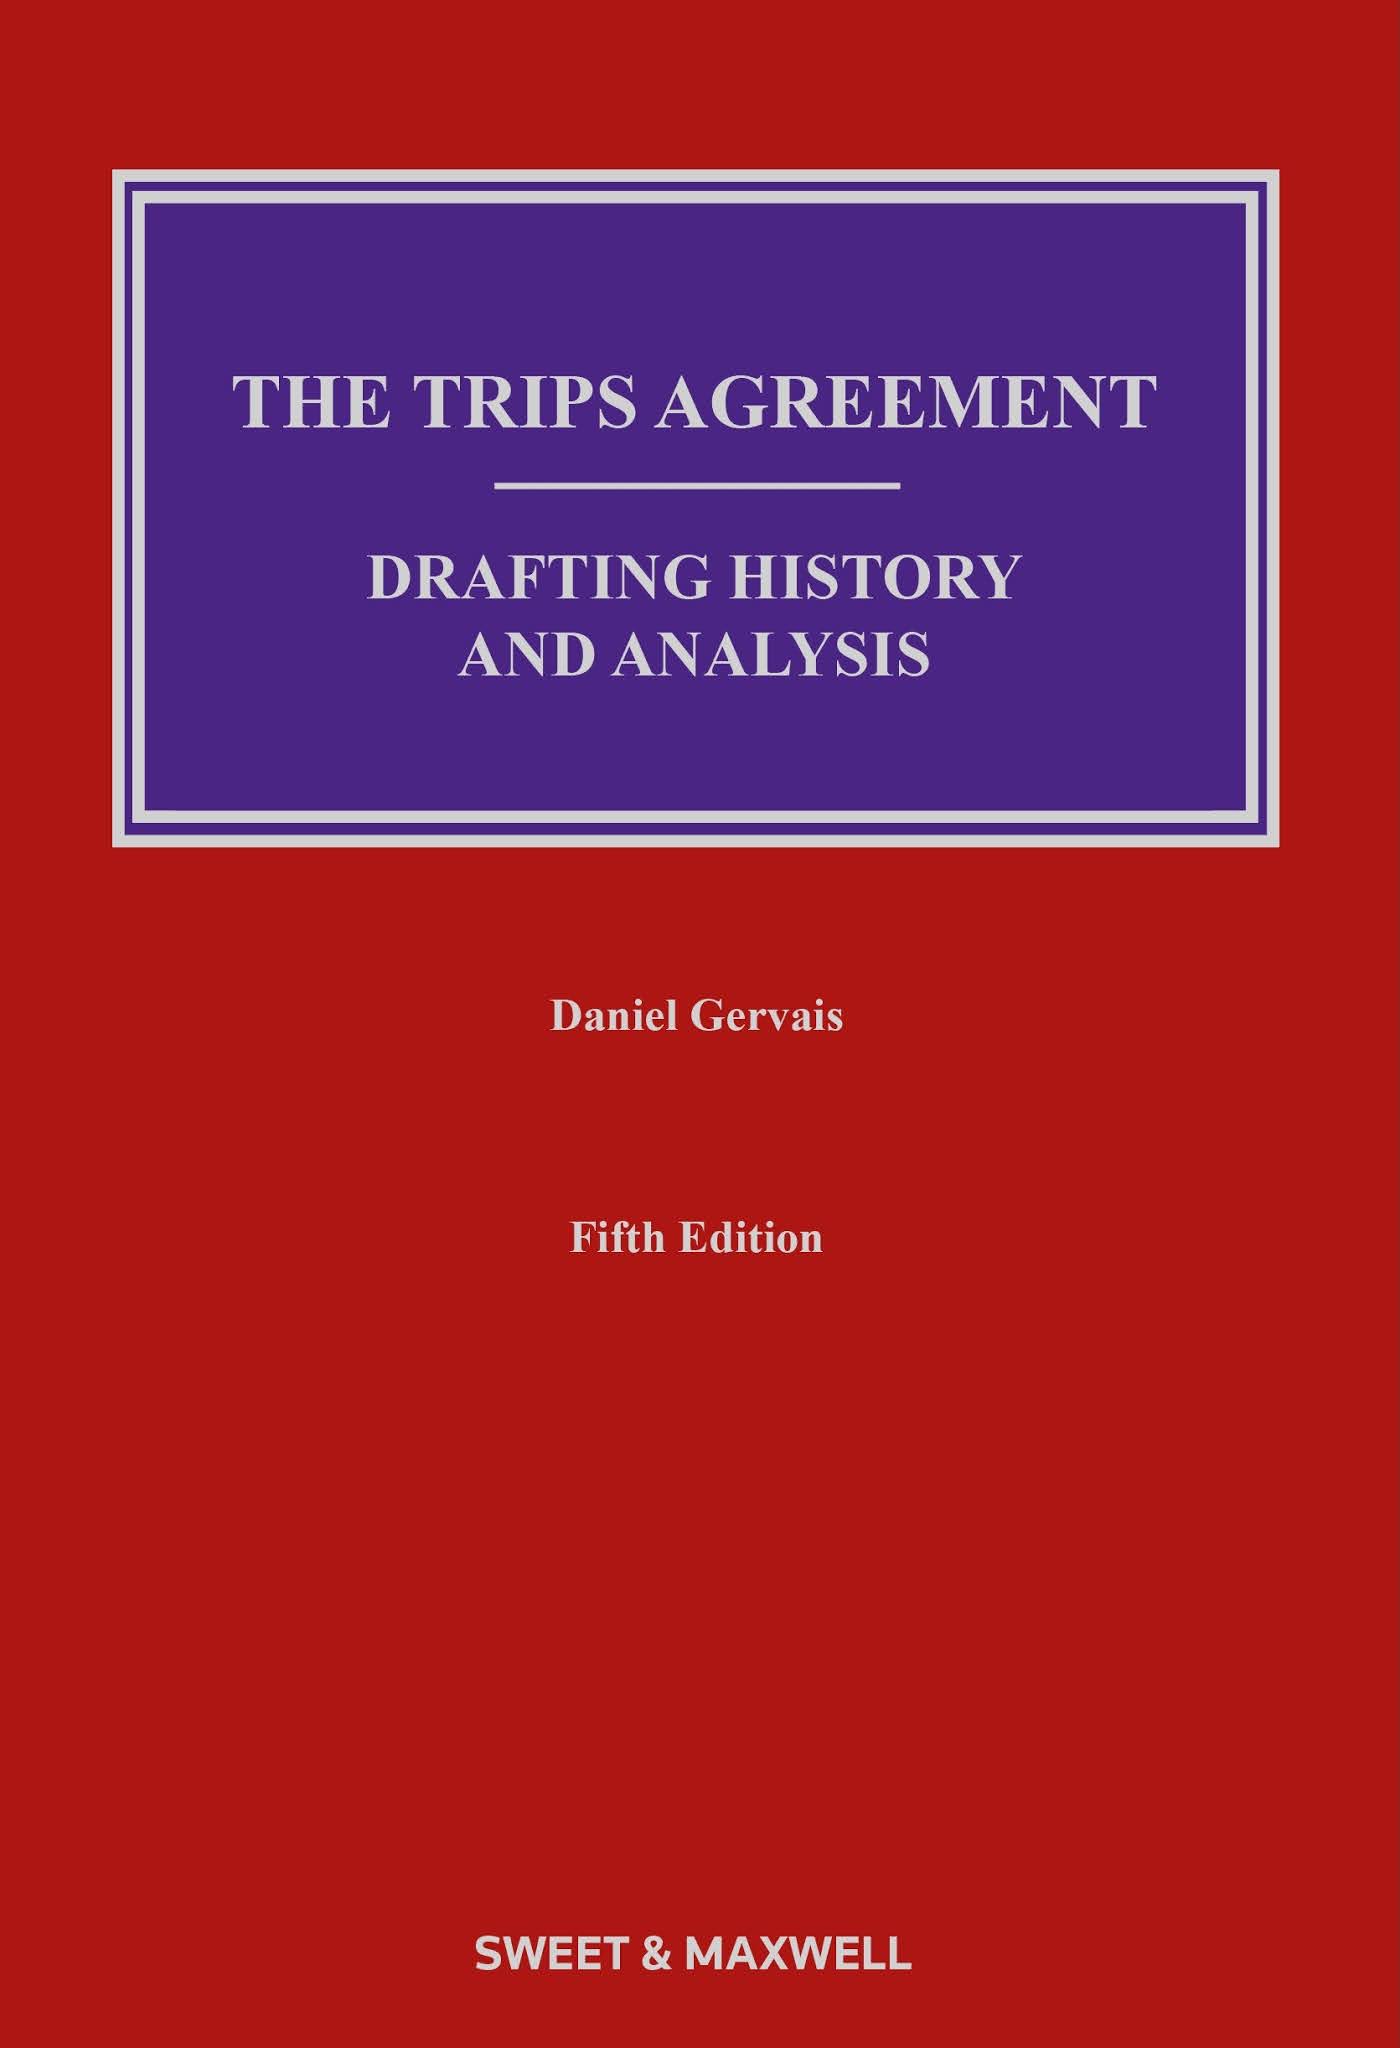 trips agreement pertains to